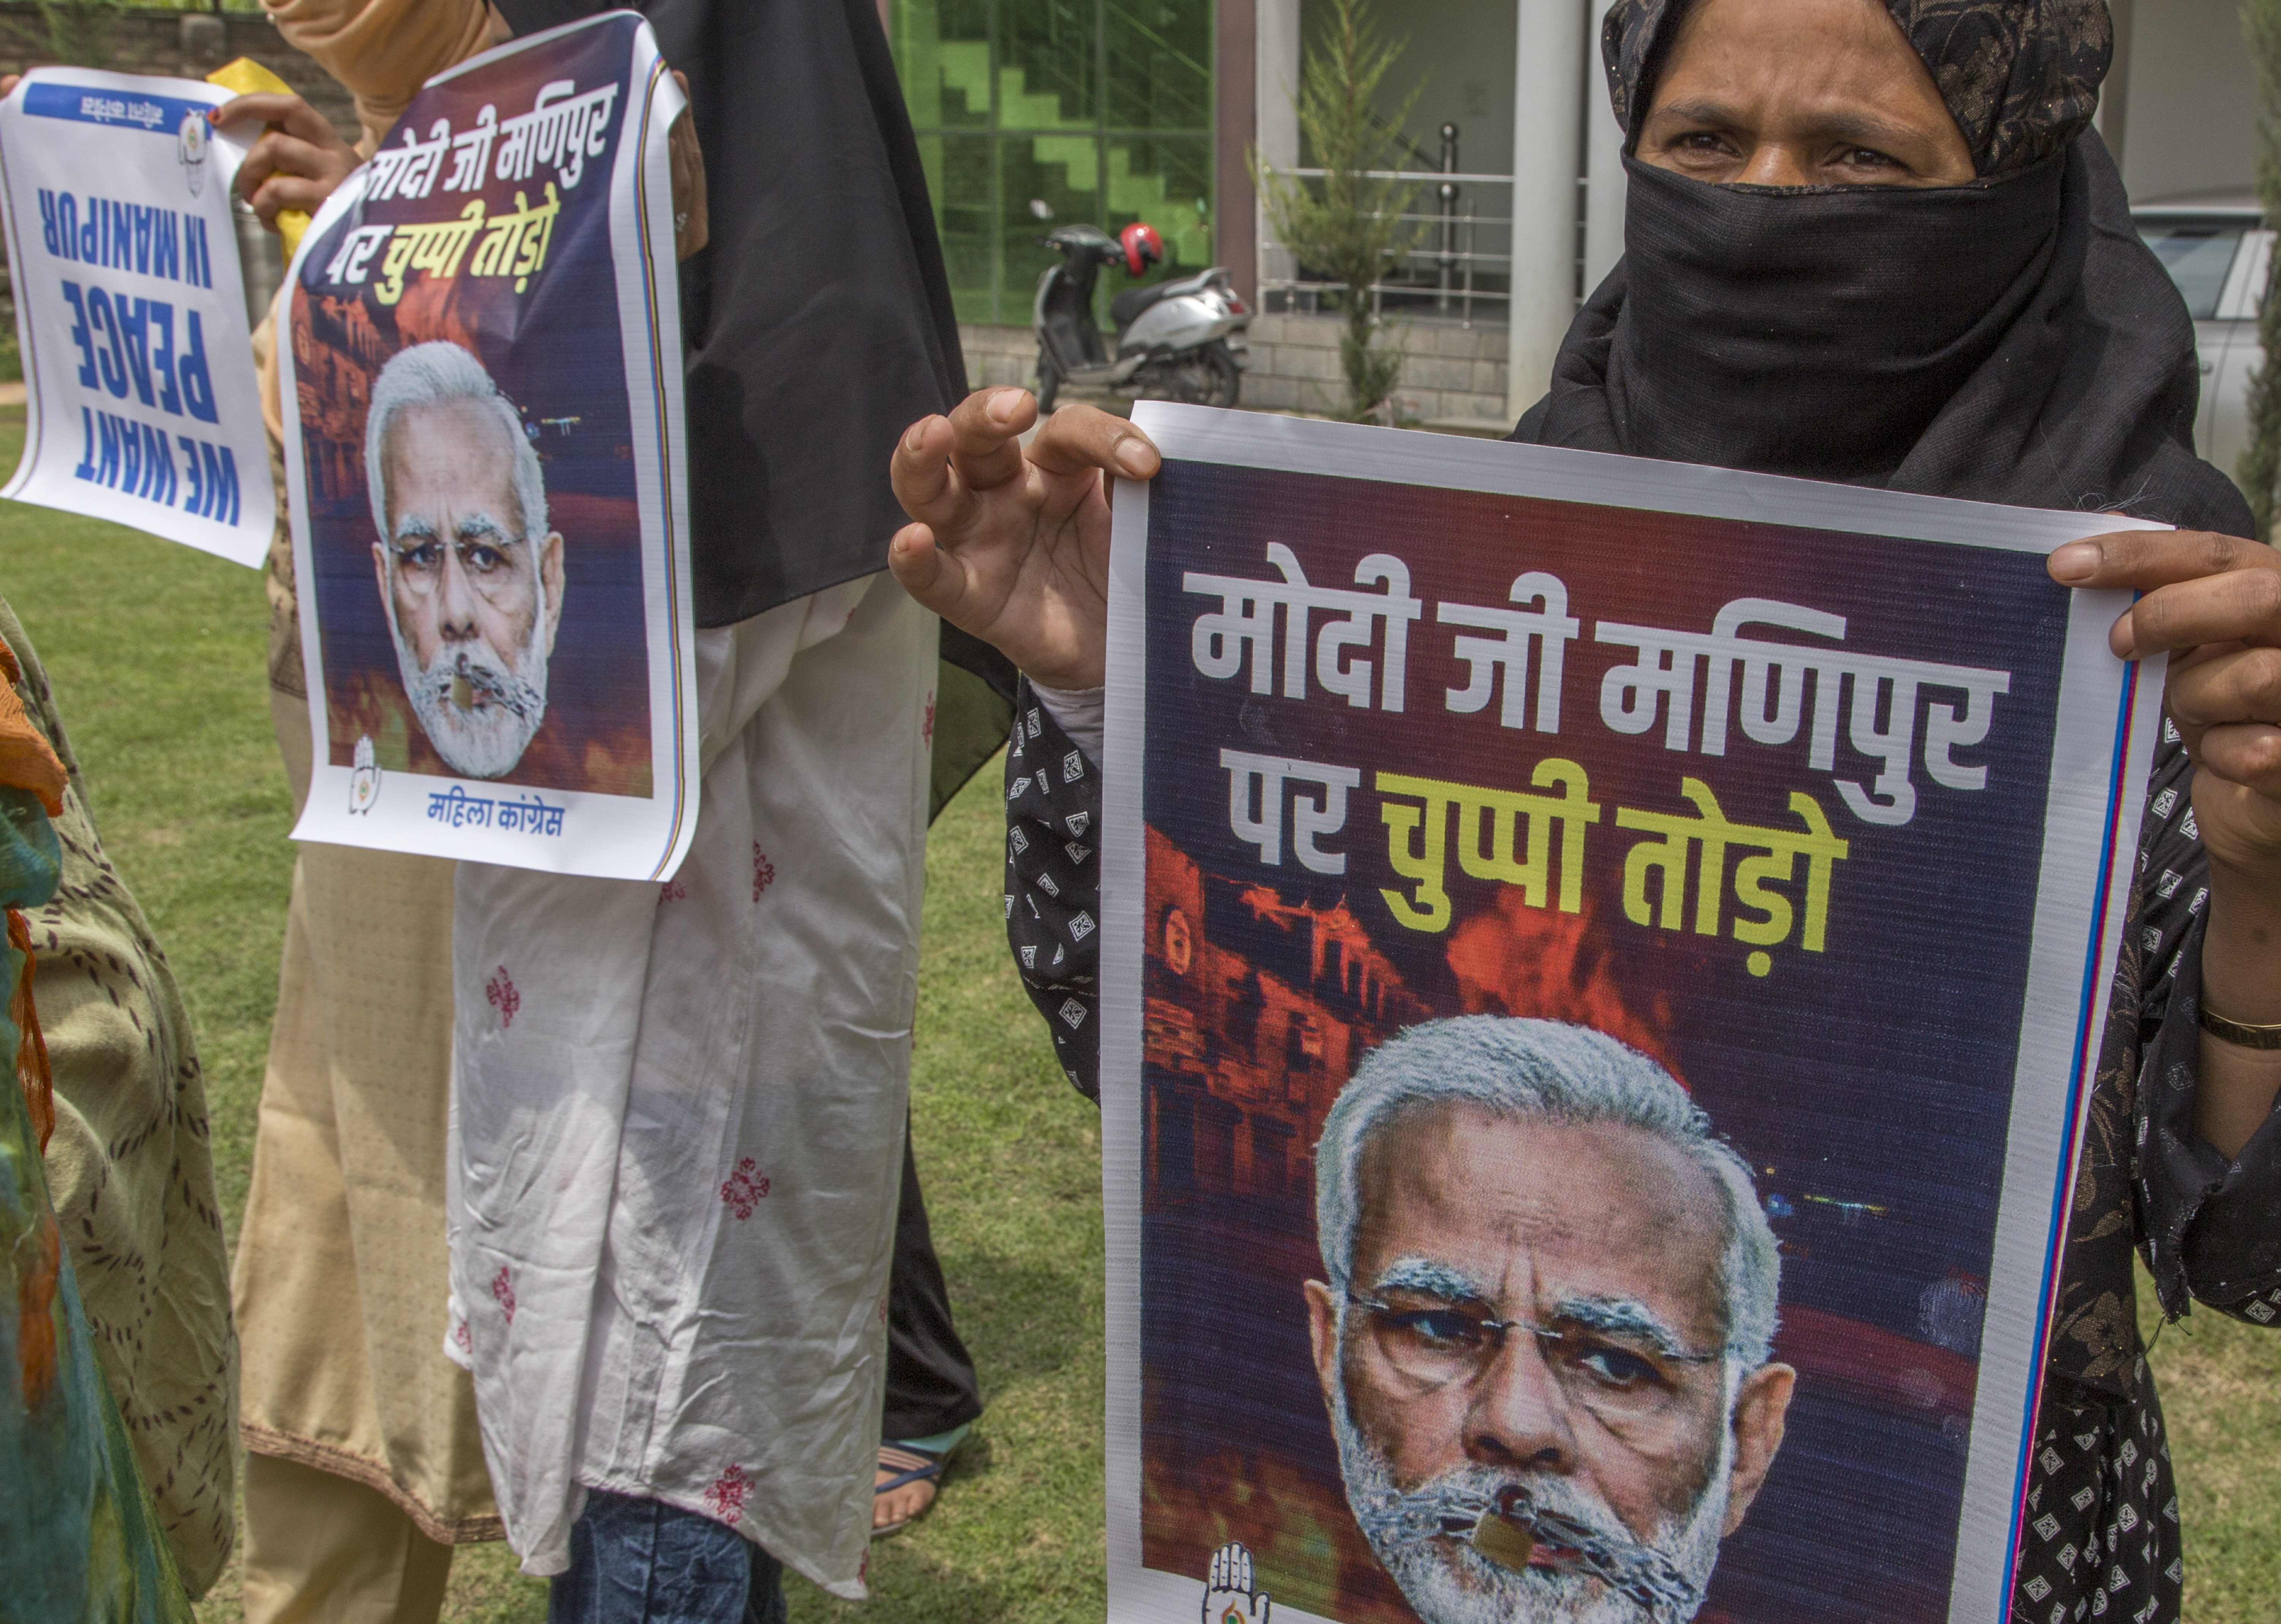 Women hold up protest posters with Narendra Modi’s face printed on them.